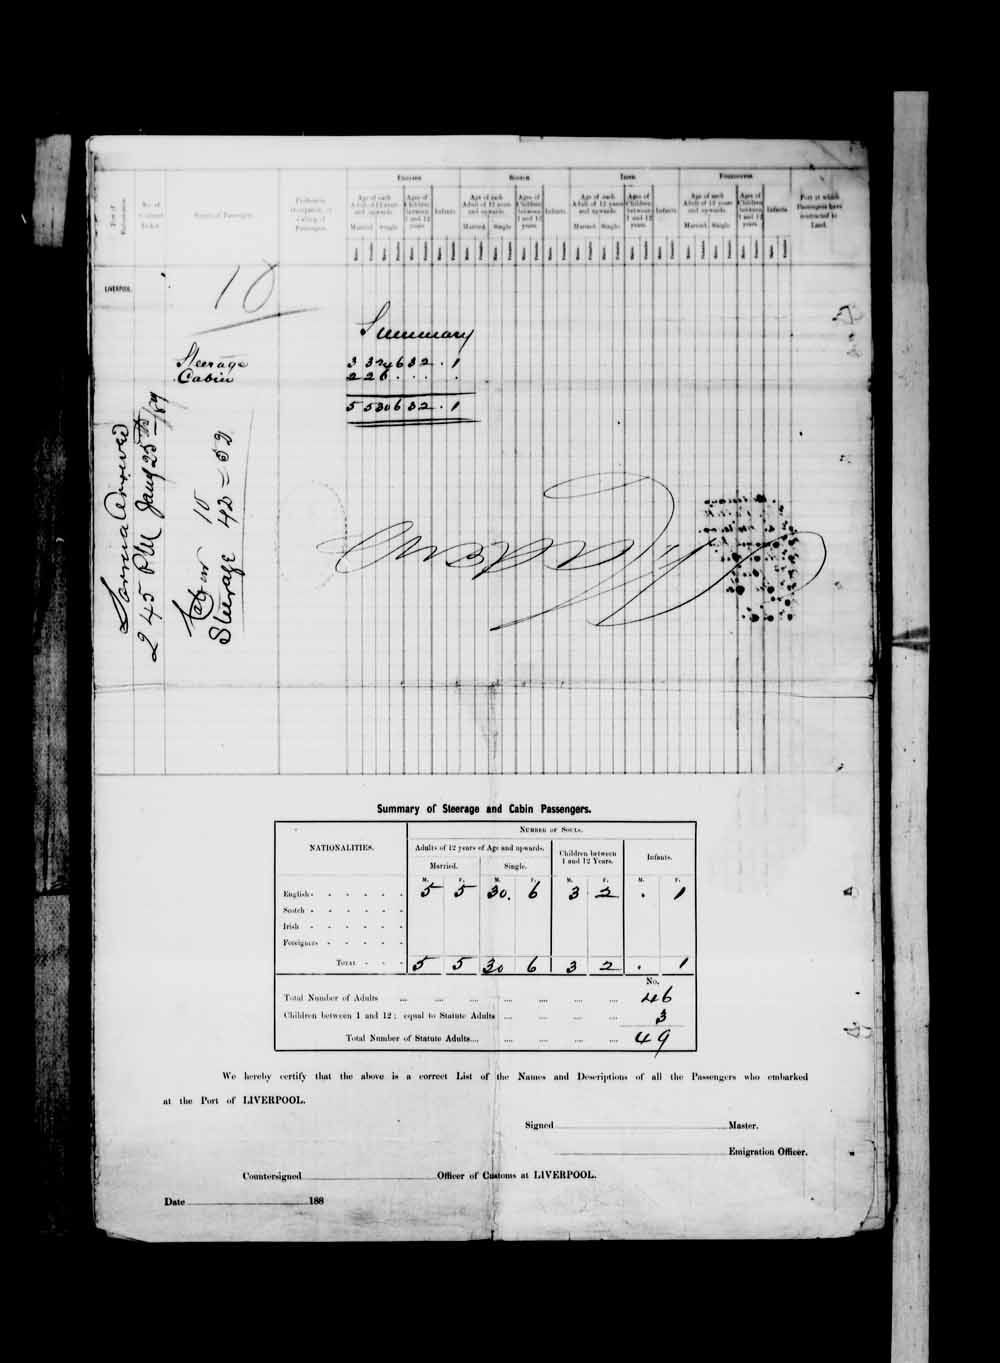 Digitized page of Passenger Lists for Image No.: e003675221